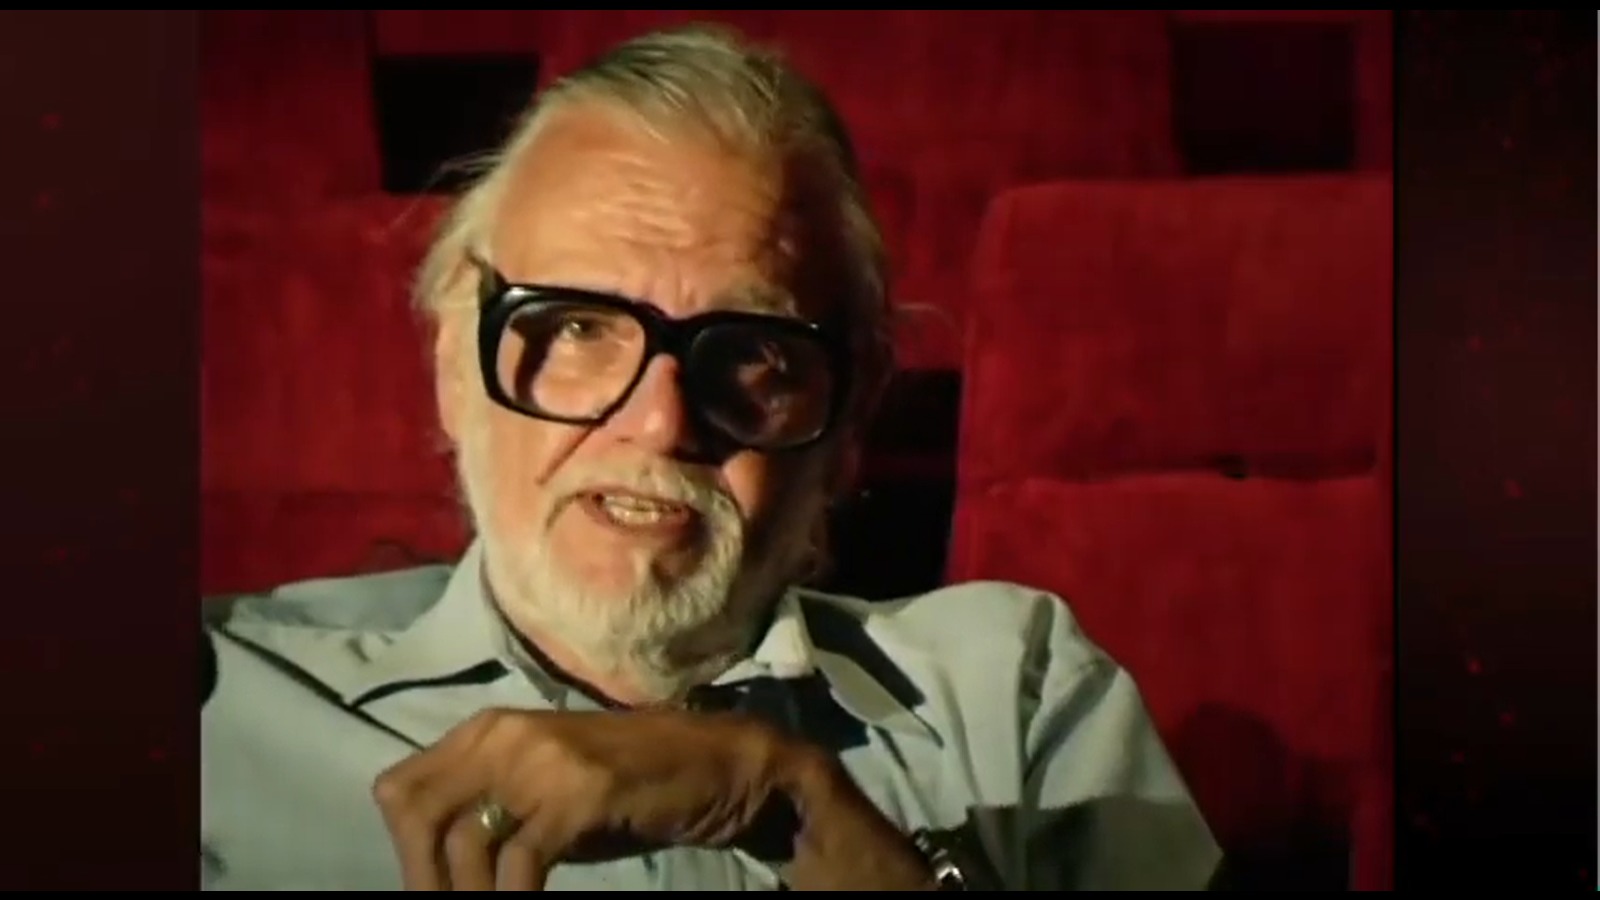 Under the scares George A Romero